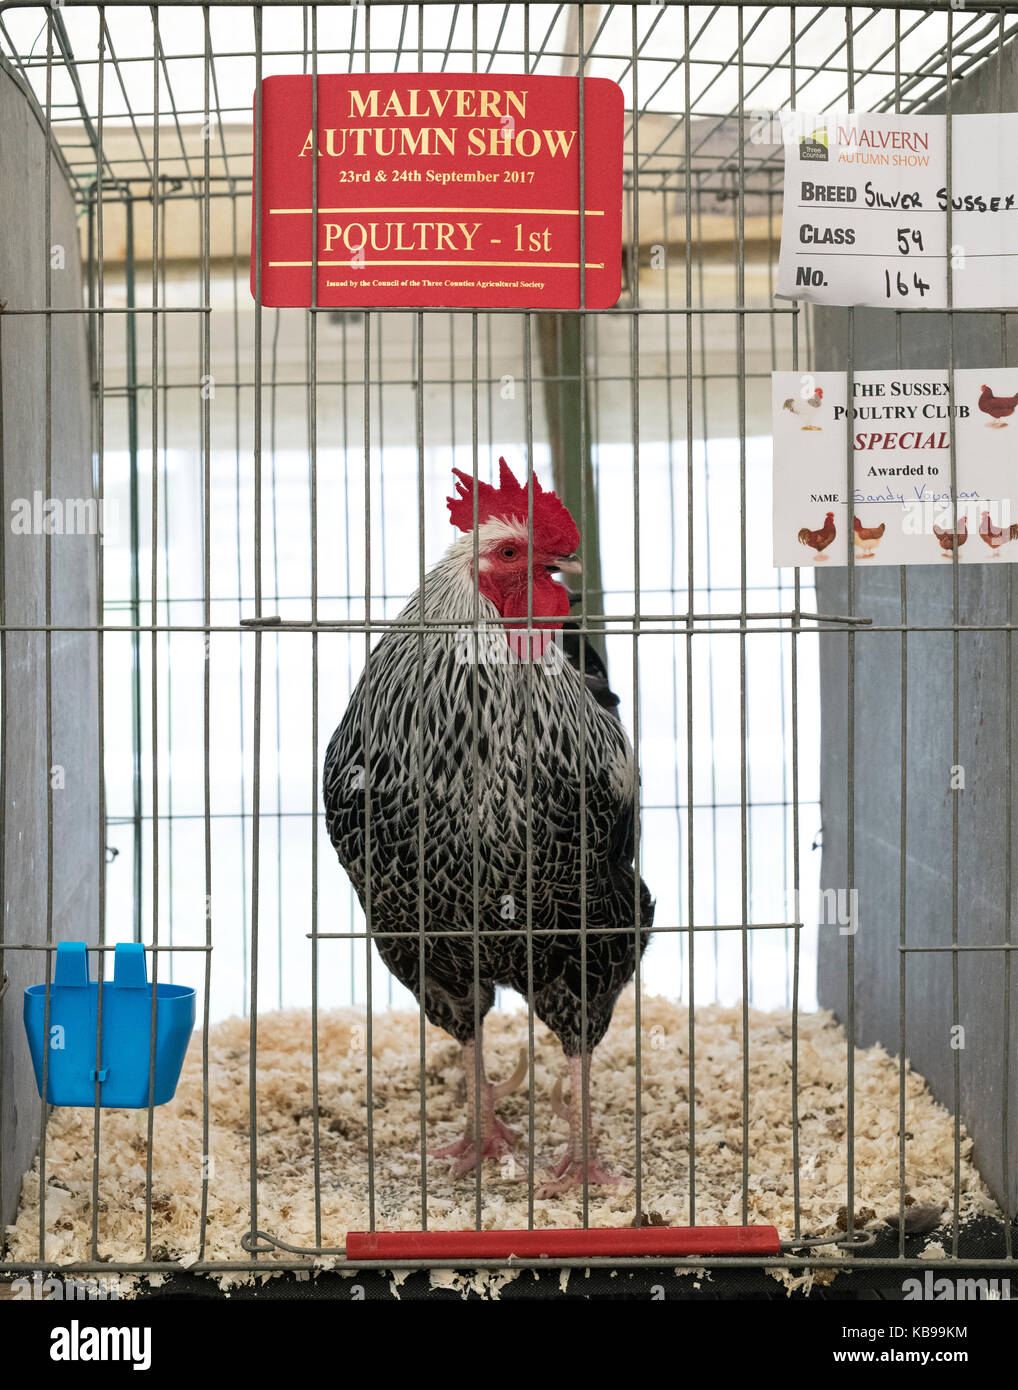 Silver sussex cockerel in a cage being shown with a first prize award at Malvern autumn show. Worcestershire, UK Stock Photo